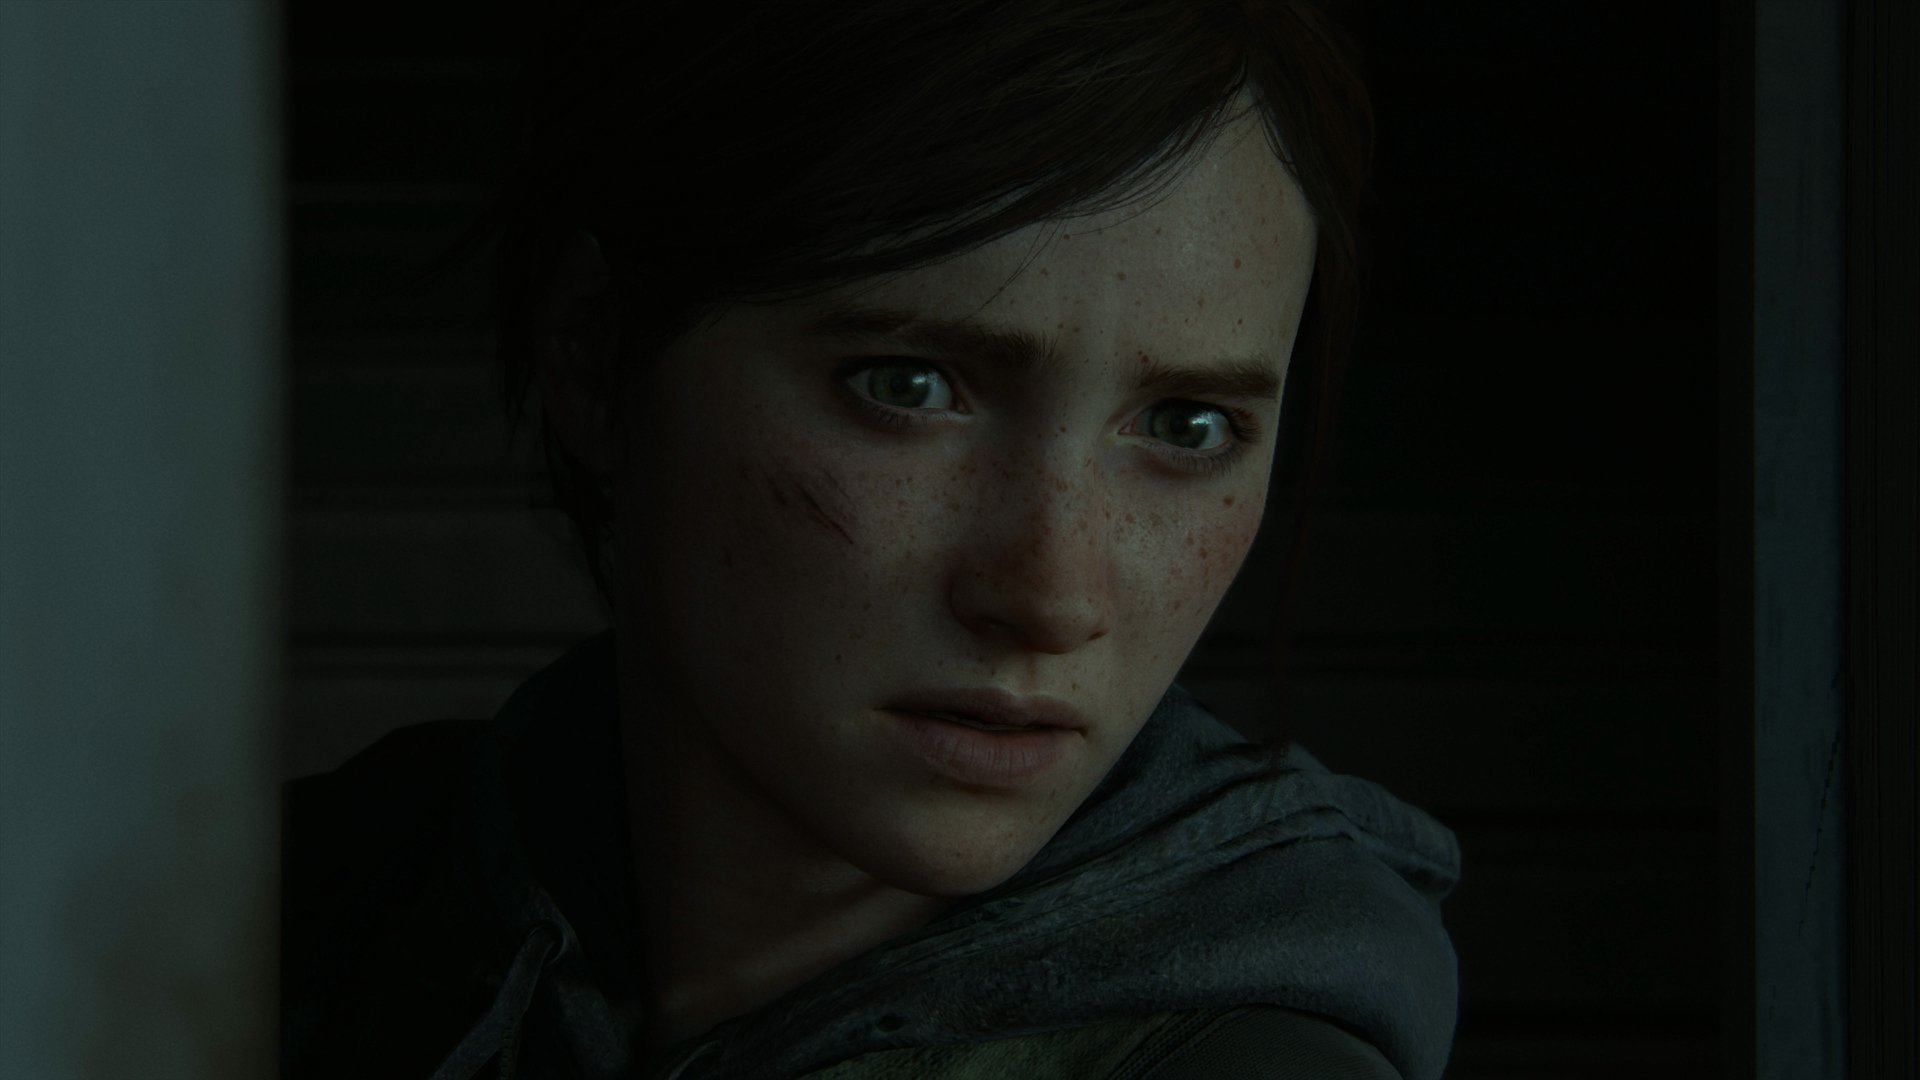 The Last of Us Part II Launches February 21, 2020.